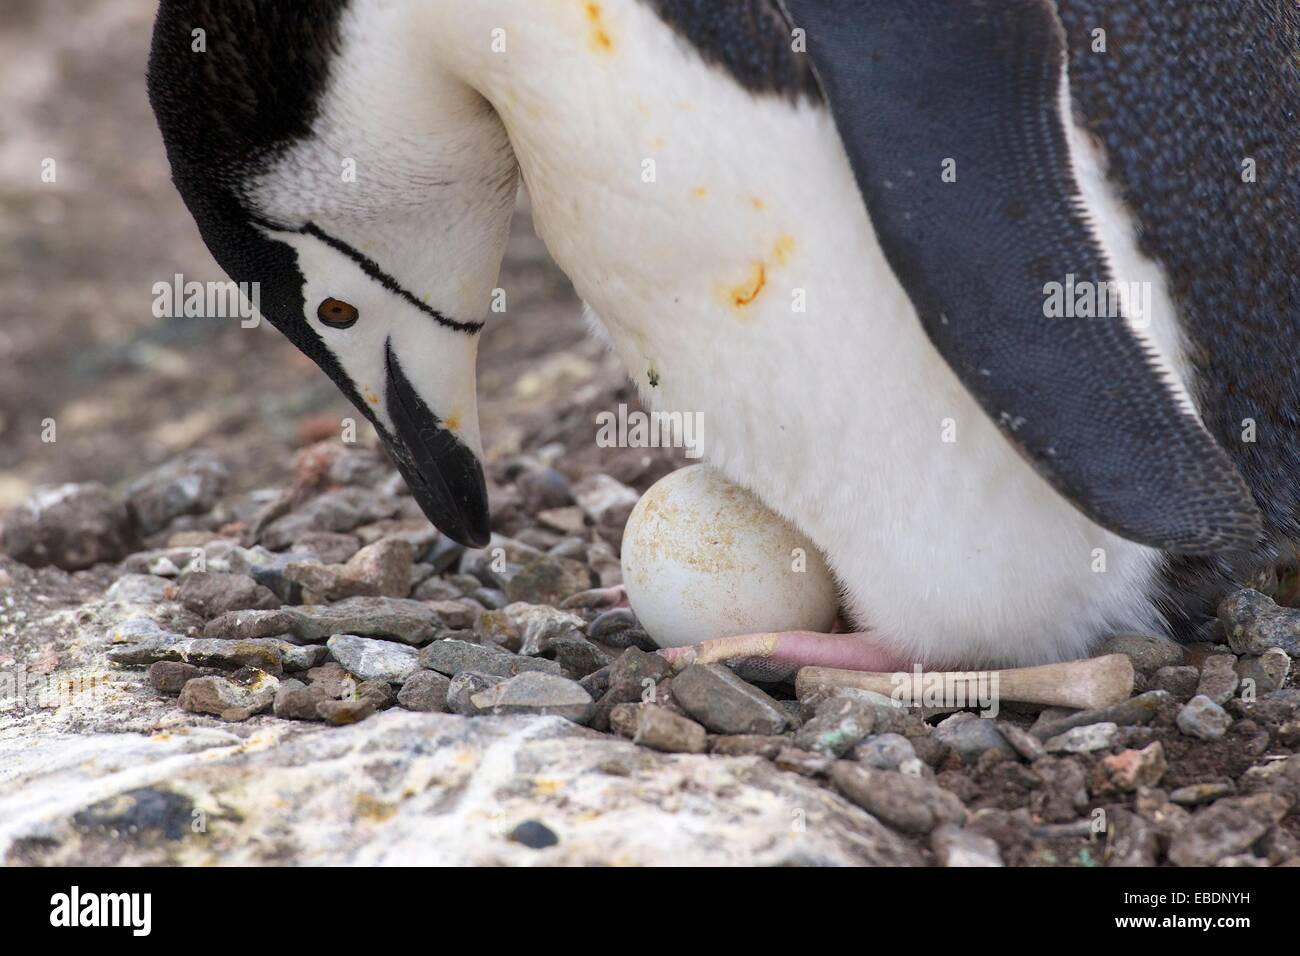 A chinstrap penguin Pygoscelis antarcticus tends its egg on a nest build of pebbles and bones at Aitcho Islands, Barrientos, Stock Photo